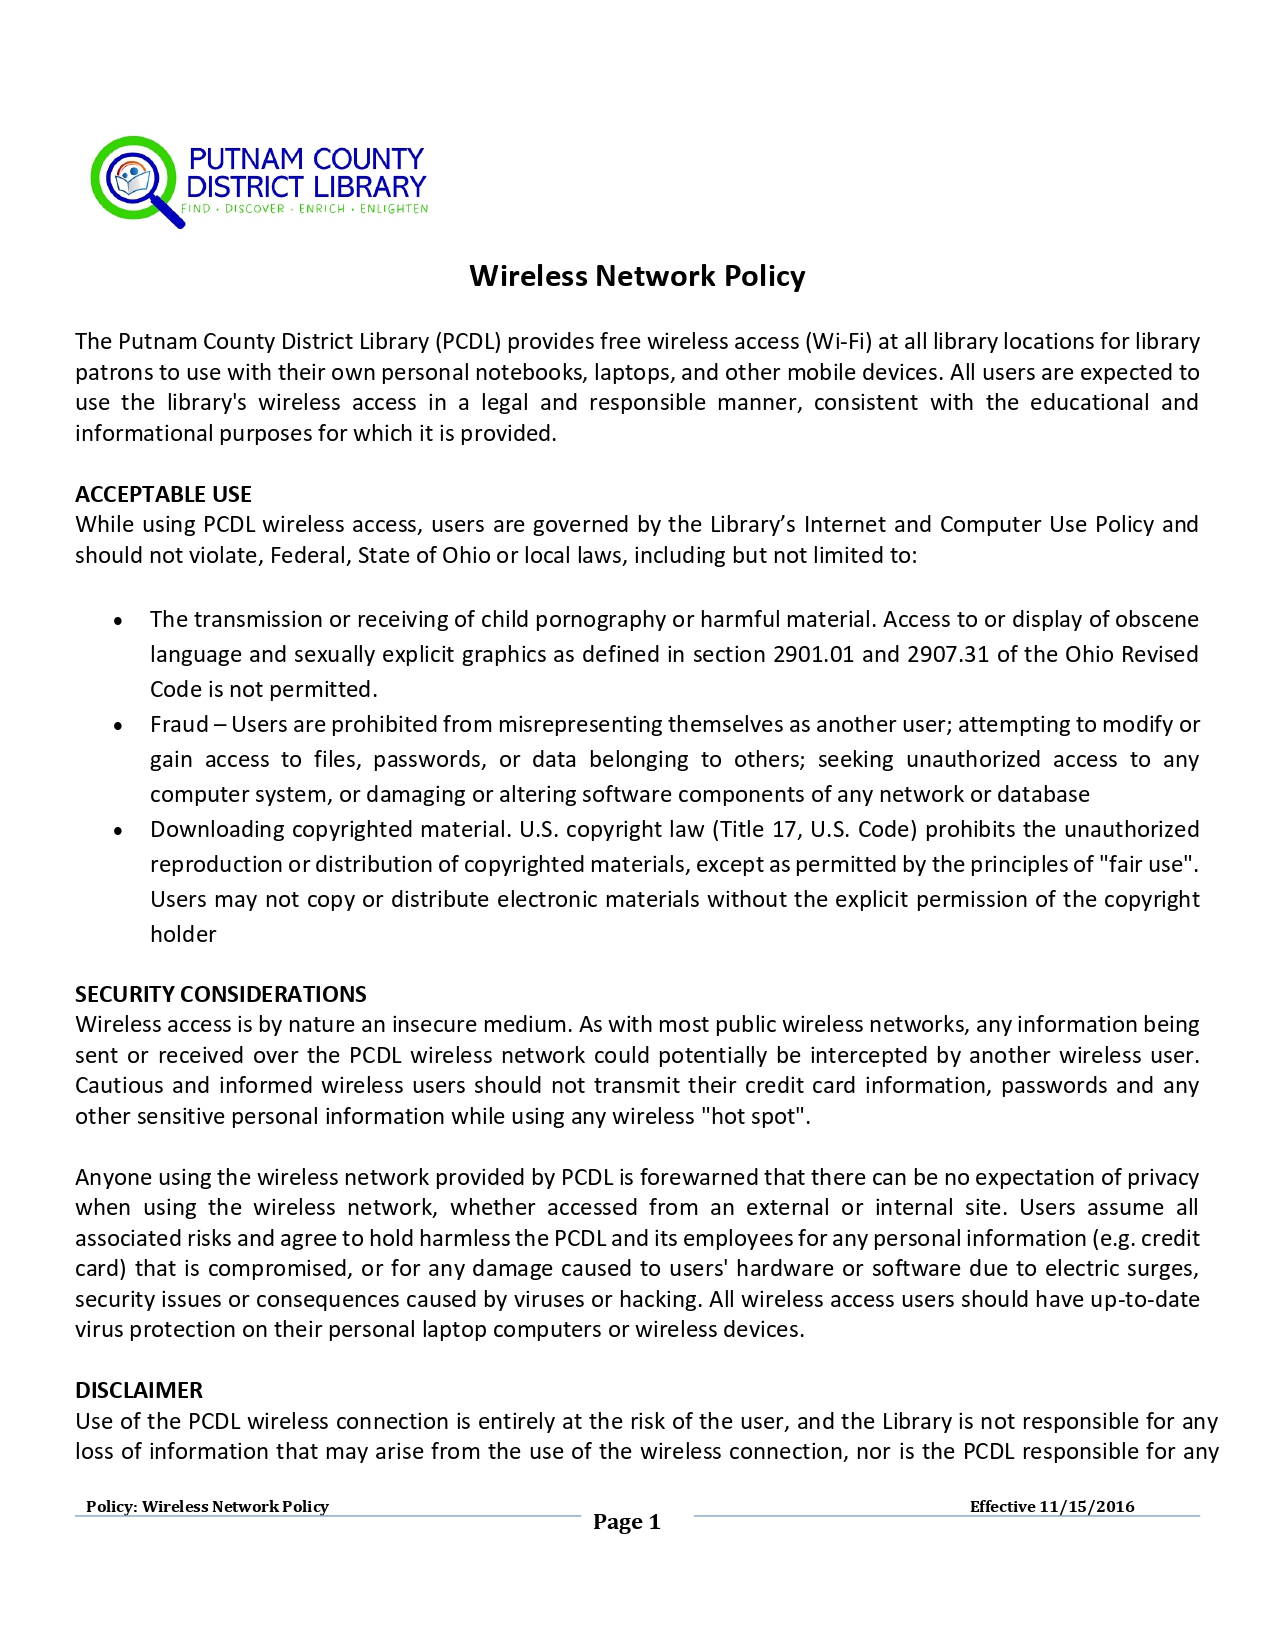 Wireless Network Policy page 1 call 419-523-3747 ext 3 for more information